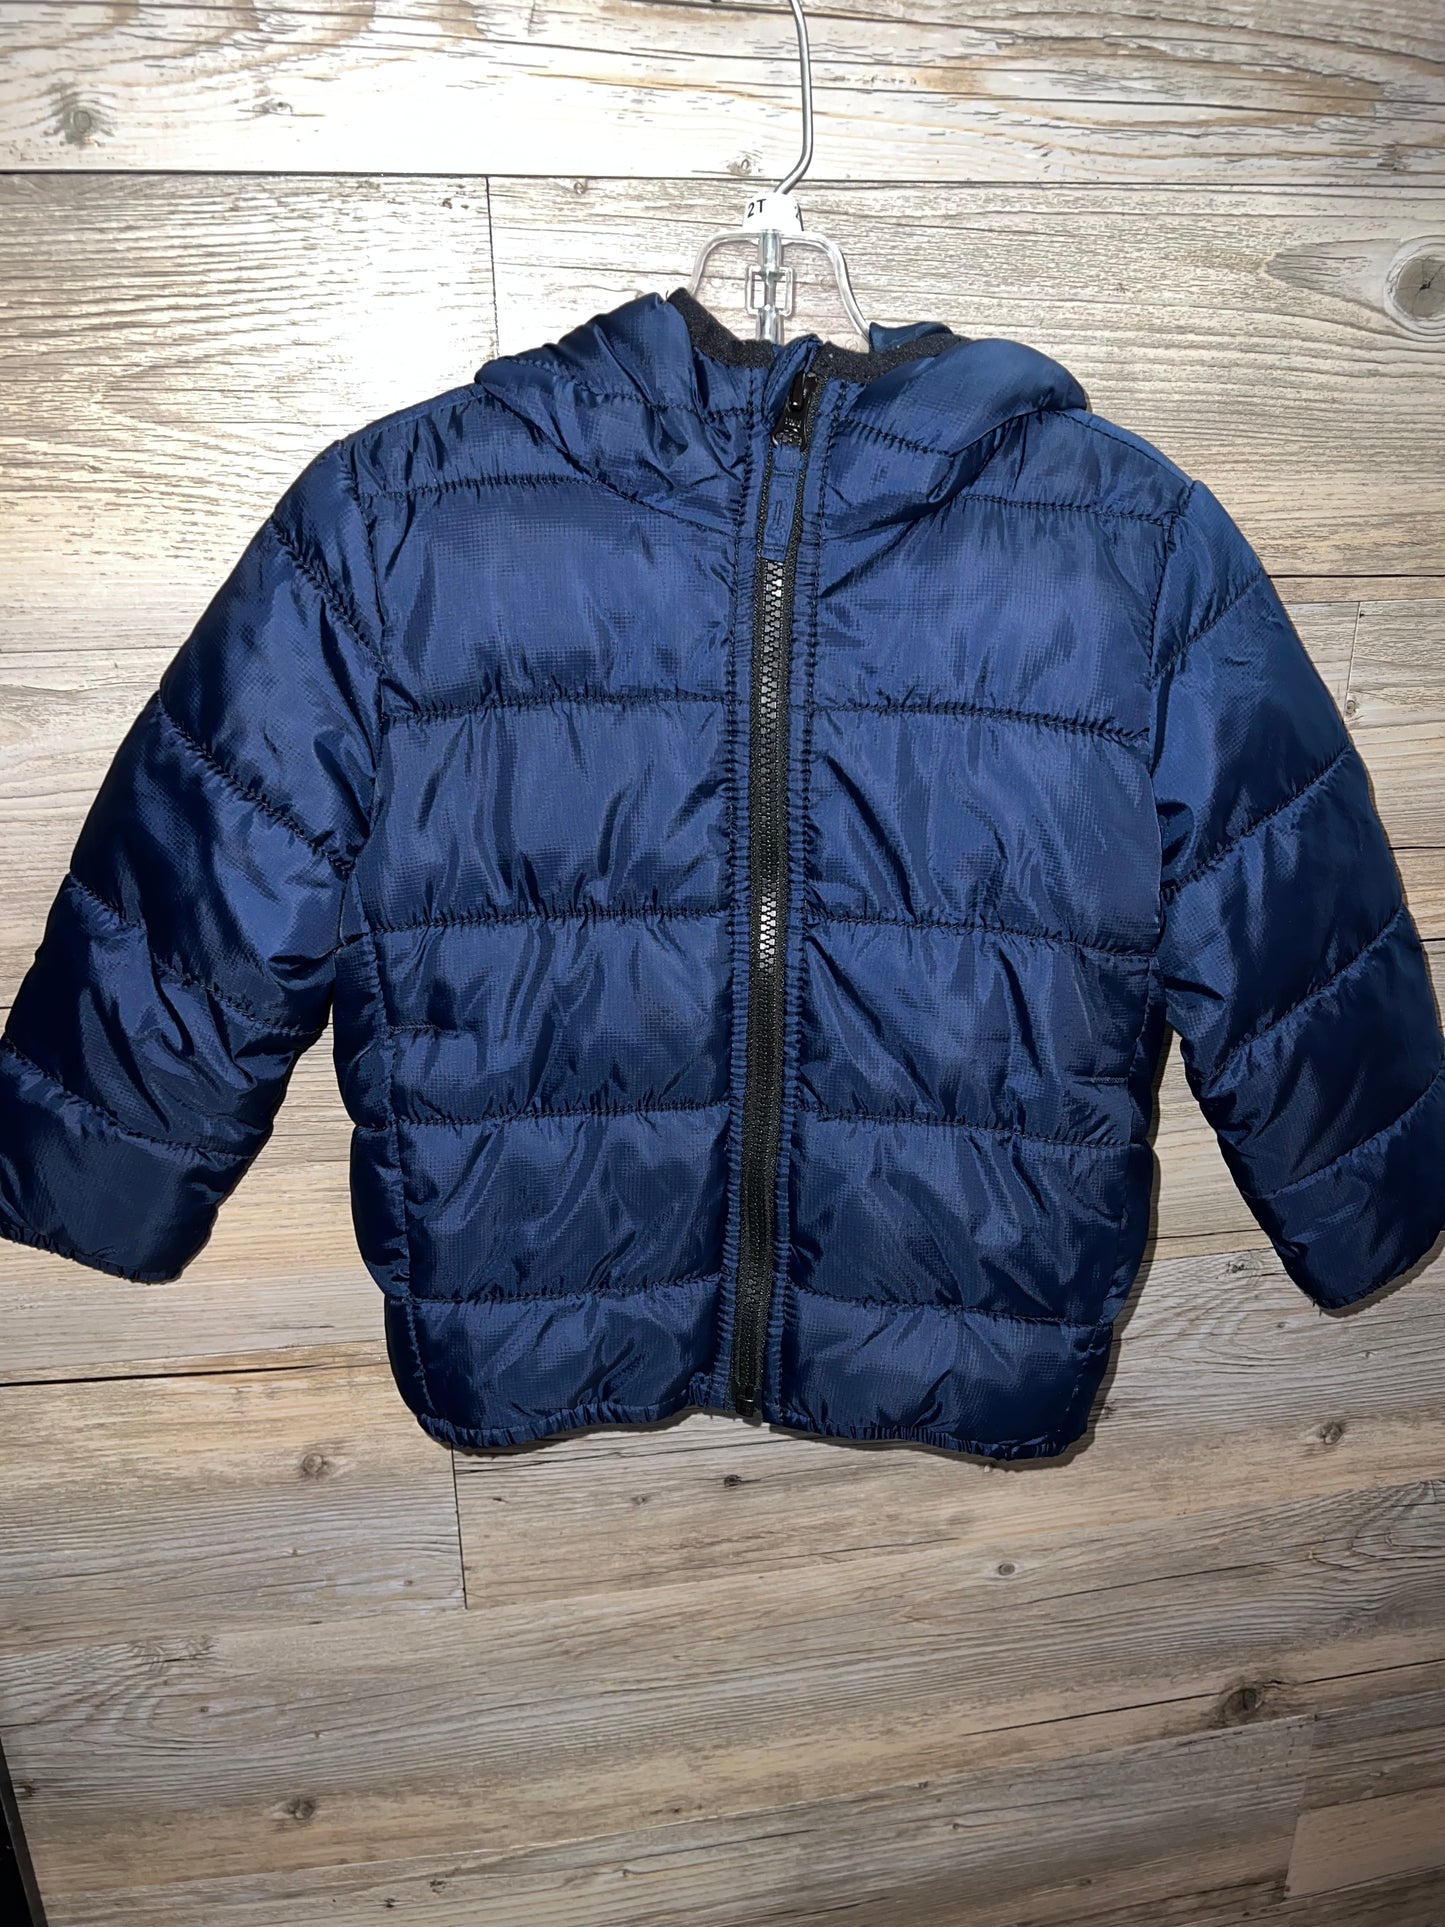 Children's Place Puffer Jacket, Size 24M